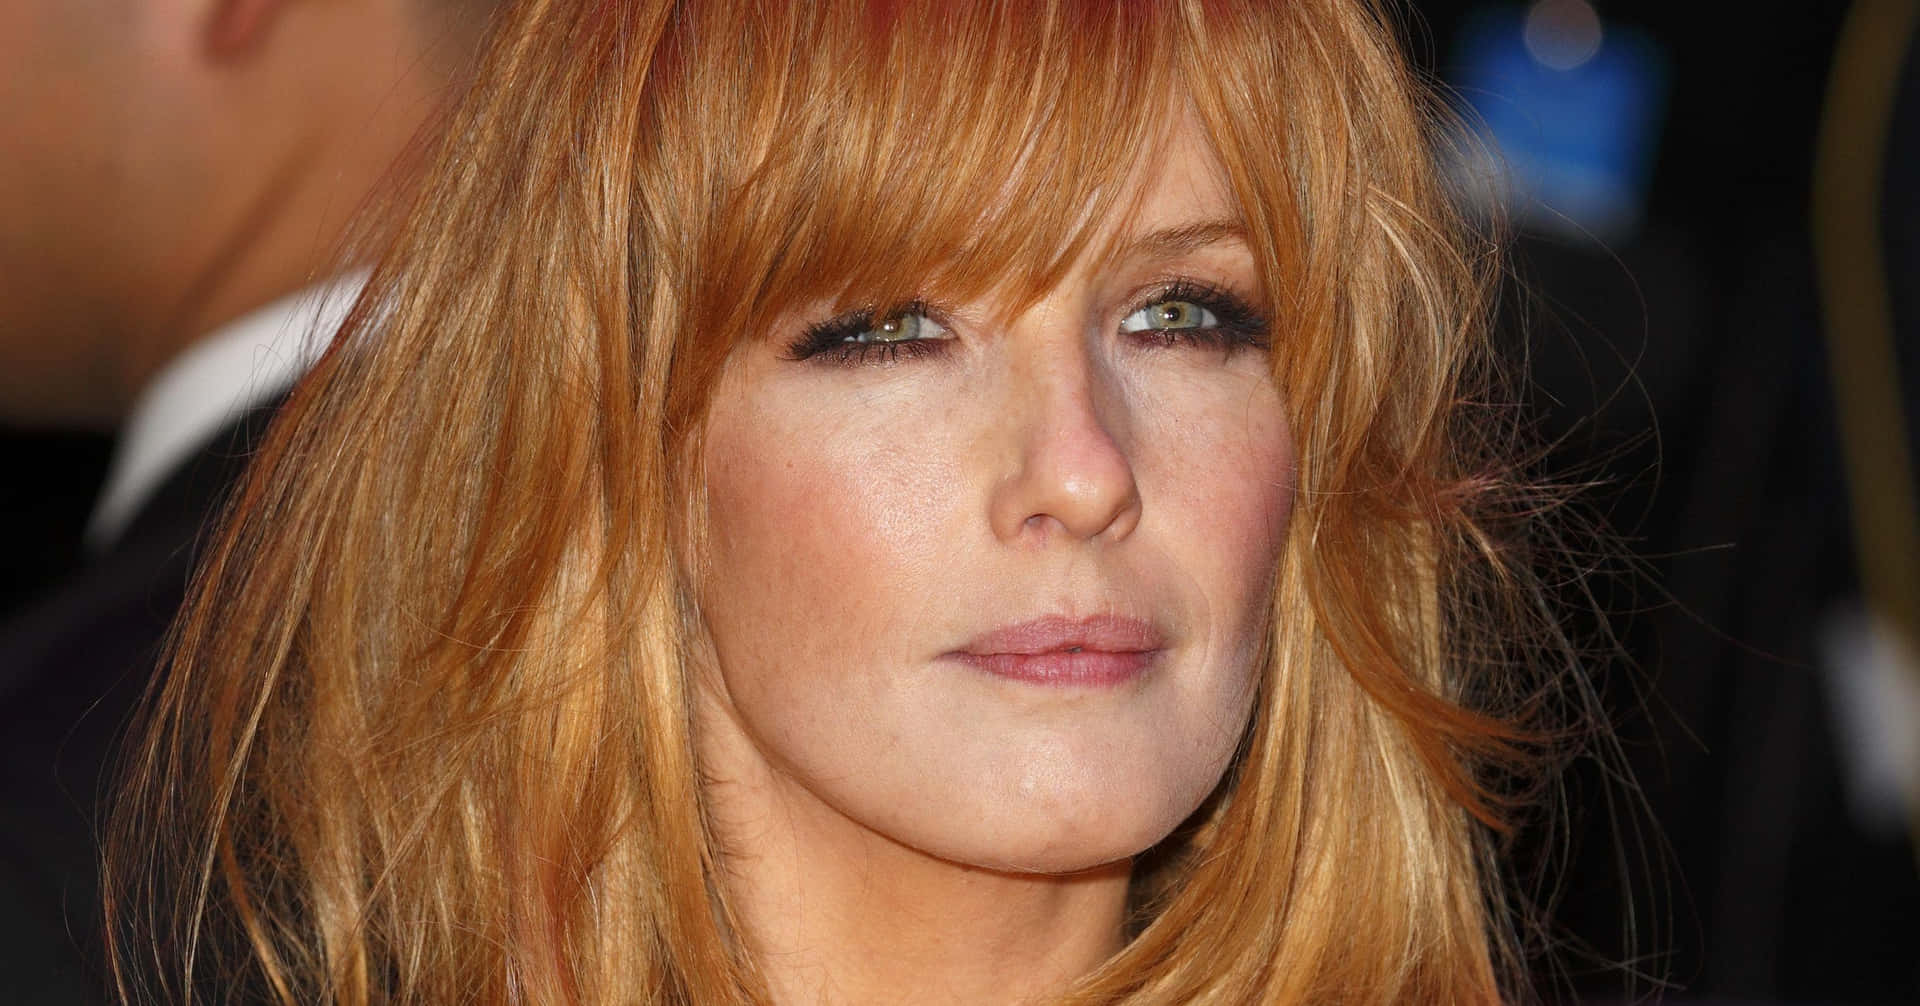 Image  Actress Kelly Reilly